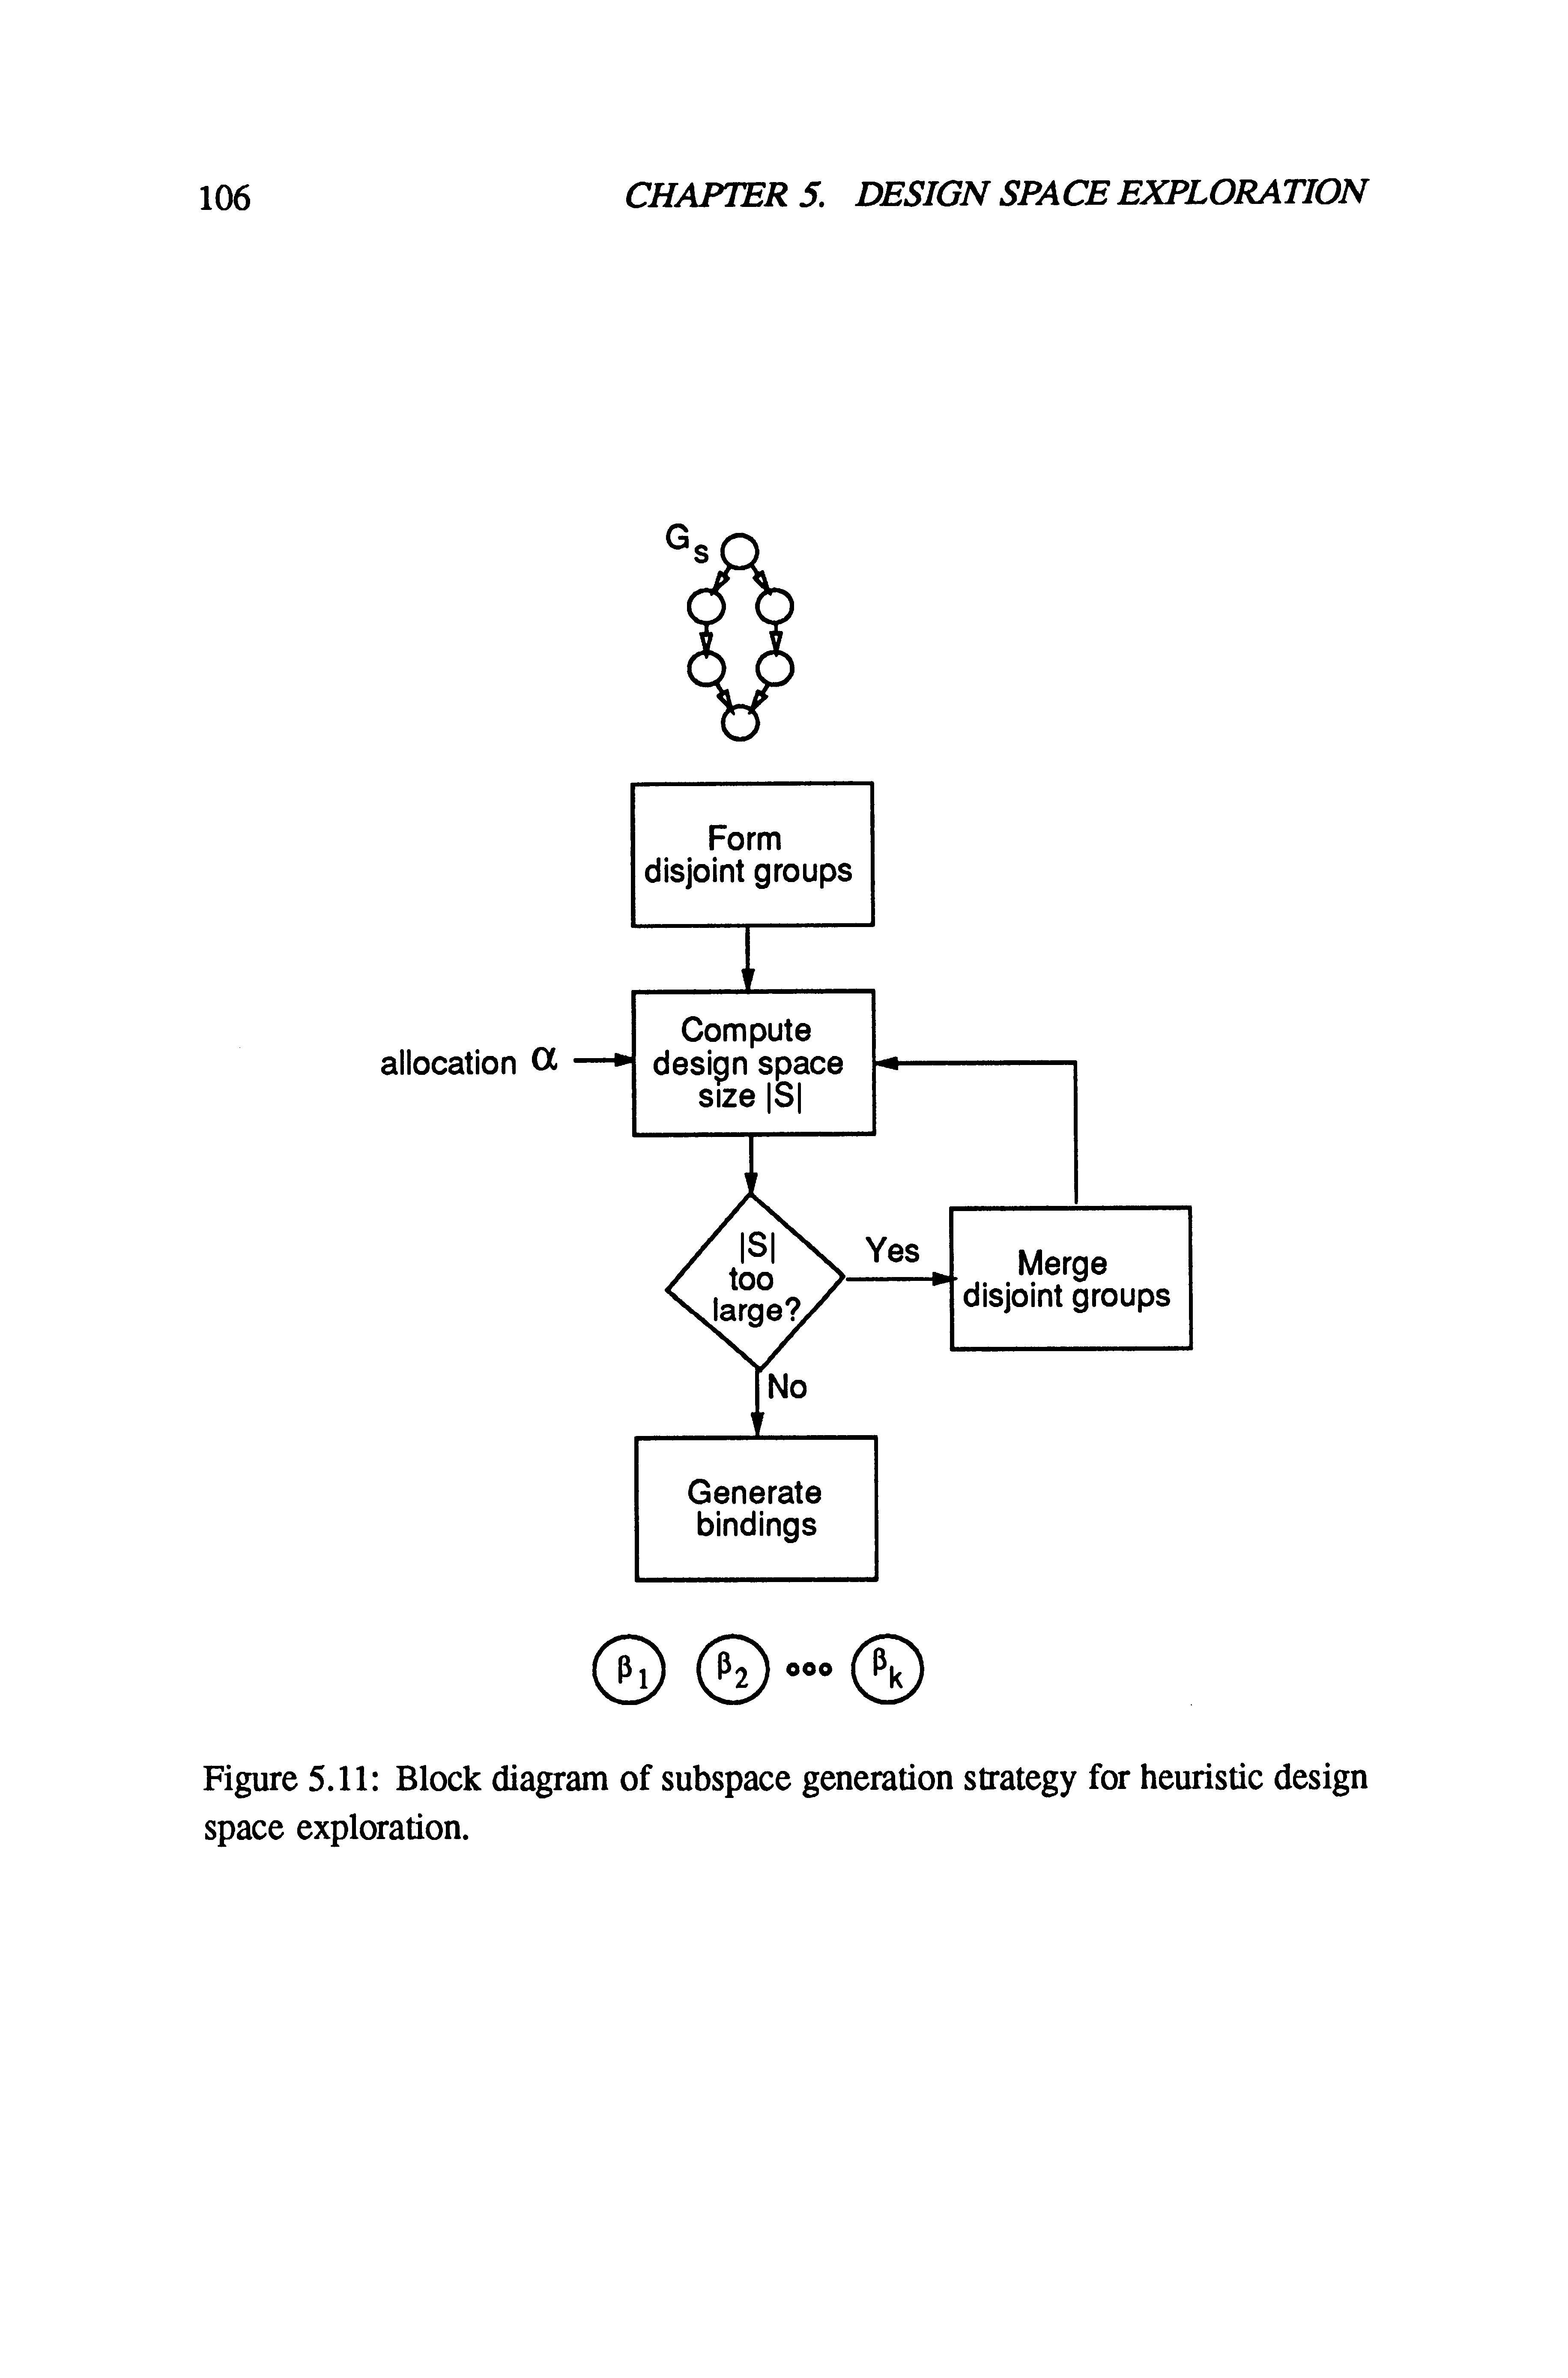 Figure 5.11 Block diagram of subspace generation strategy for heuristic design space exploration.